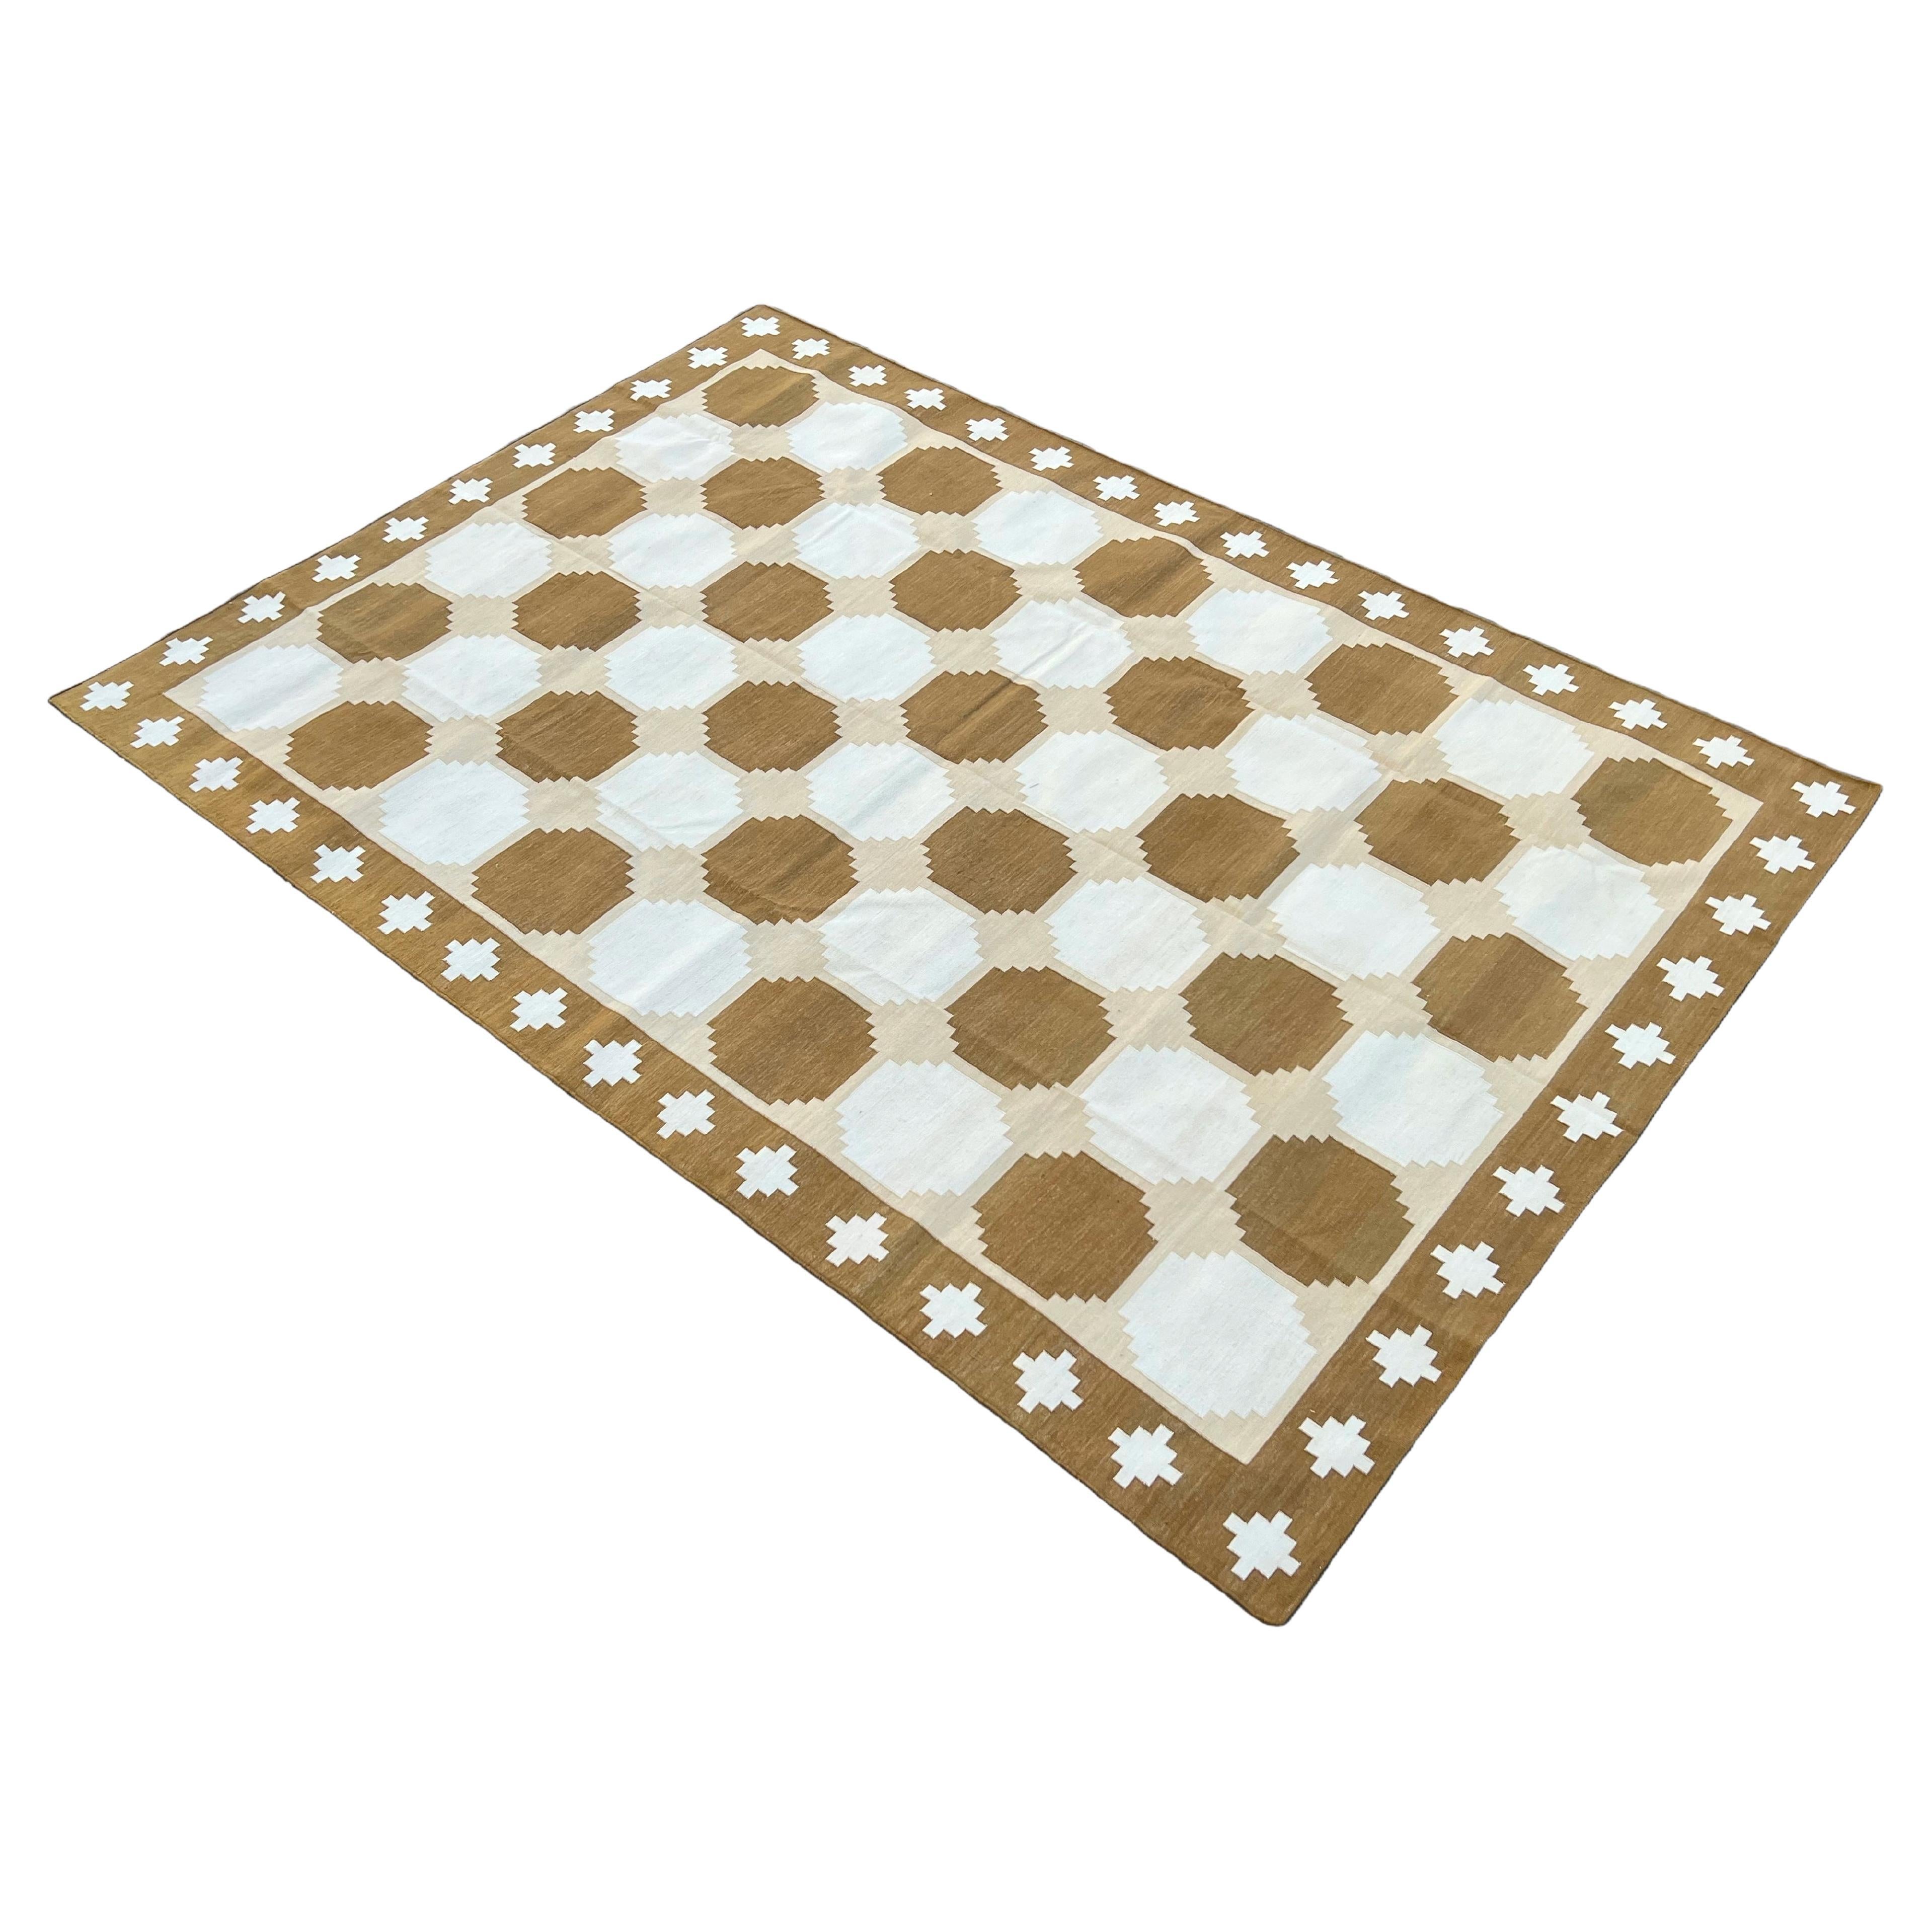 Handmade Cotton Area Flat Weave Rug, Beige & Brown Indian Star Geometric Dhurrie For Sale